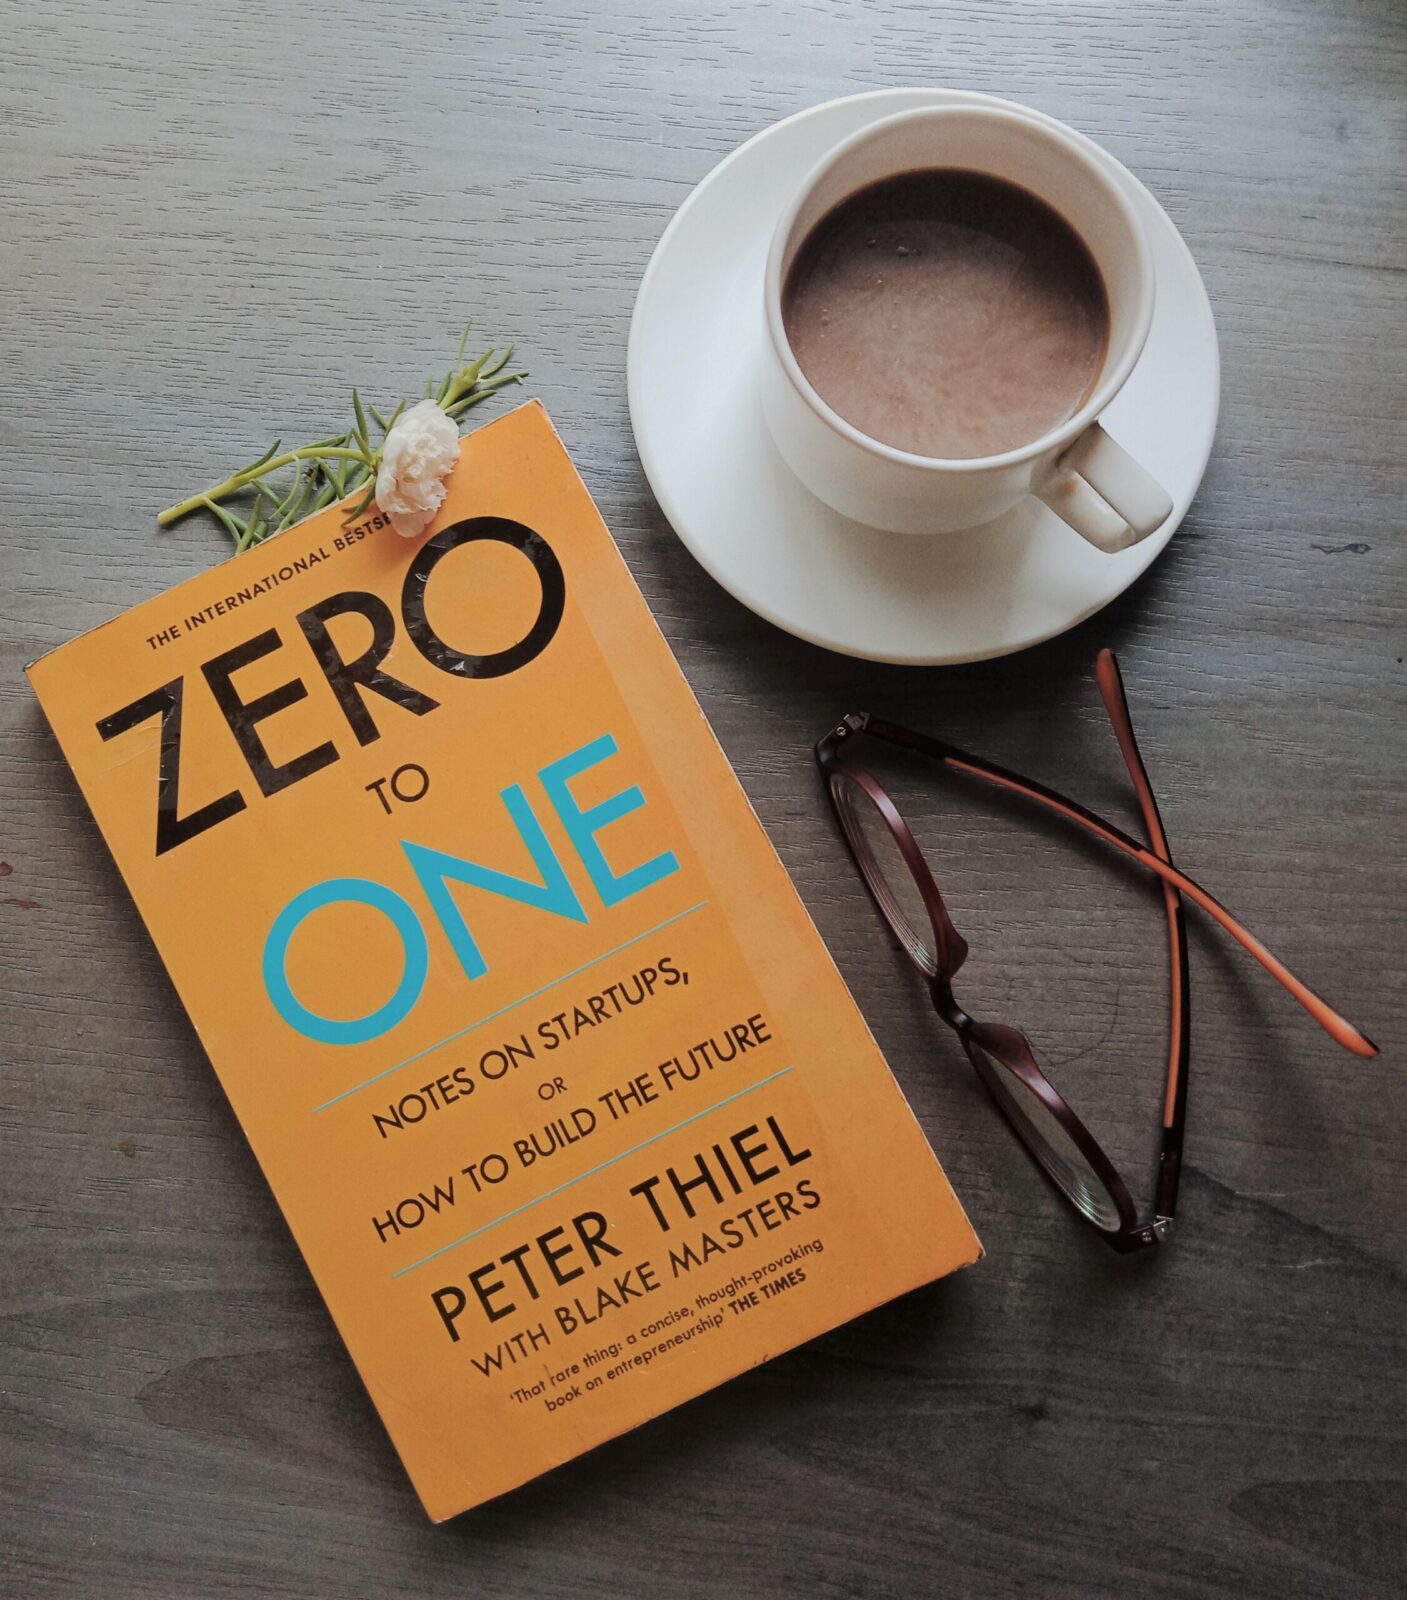 A PROVOCATIVE EXCERPT FROM PETER THIEL'S NEW BOOK: ZERO TO ONE